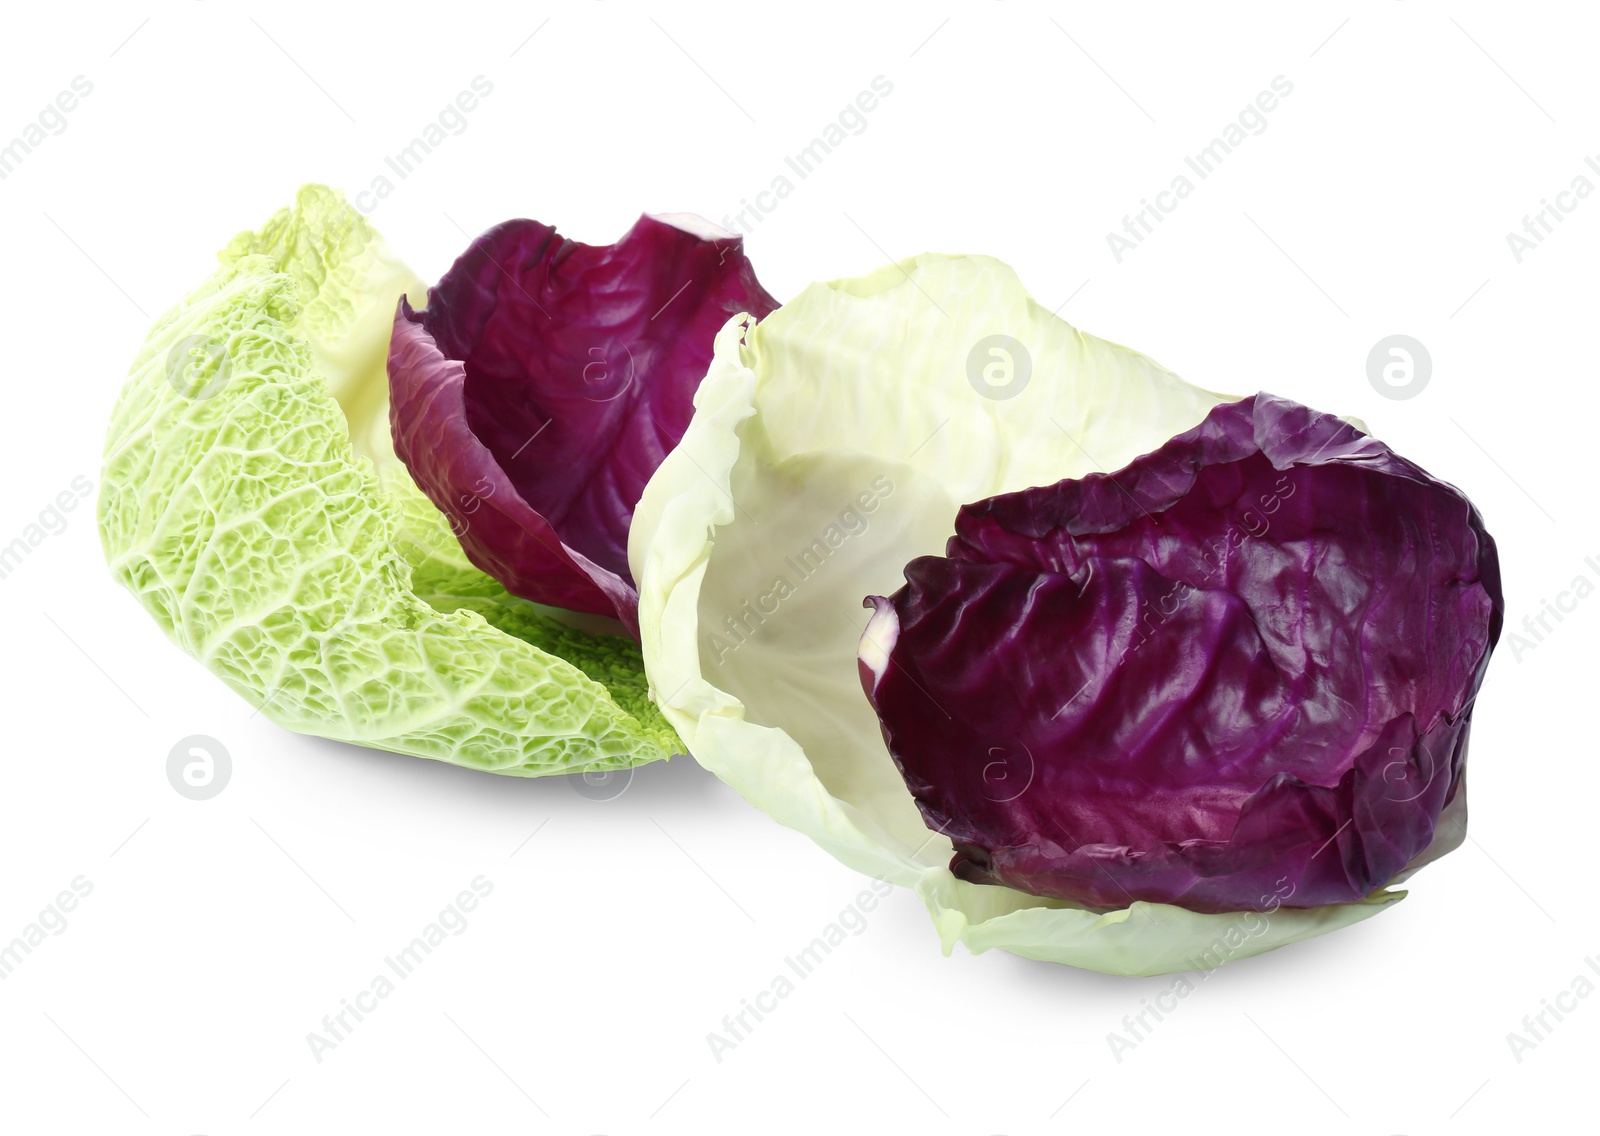 Photo of Different fresh cabbage leaves on white background